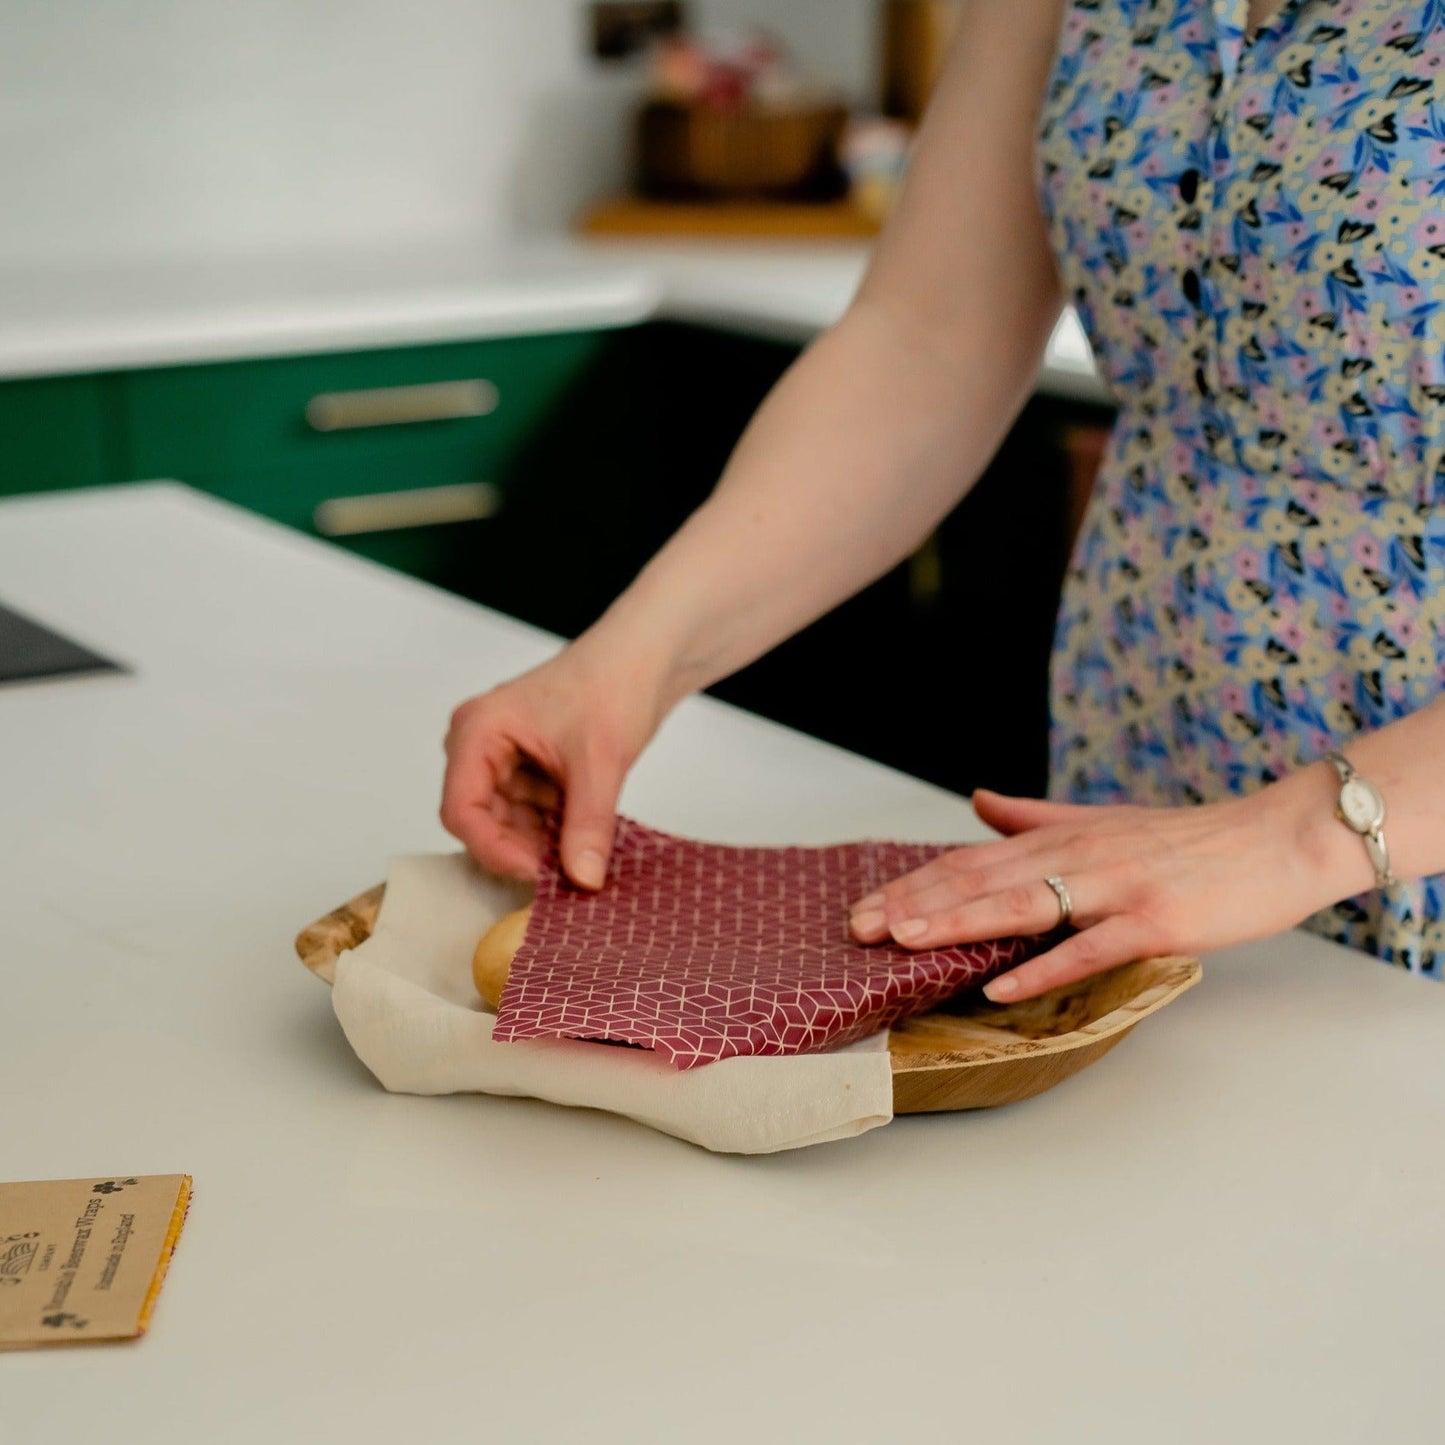 Handmade Beeswax Wraps - wrapping an apple pie